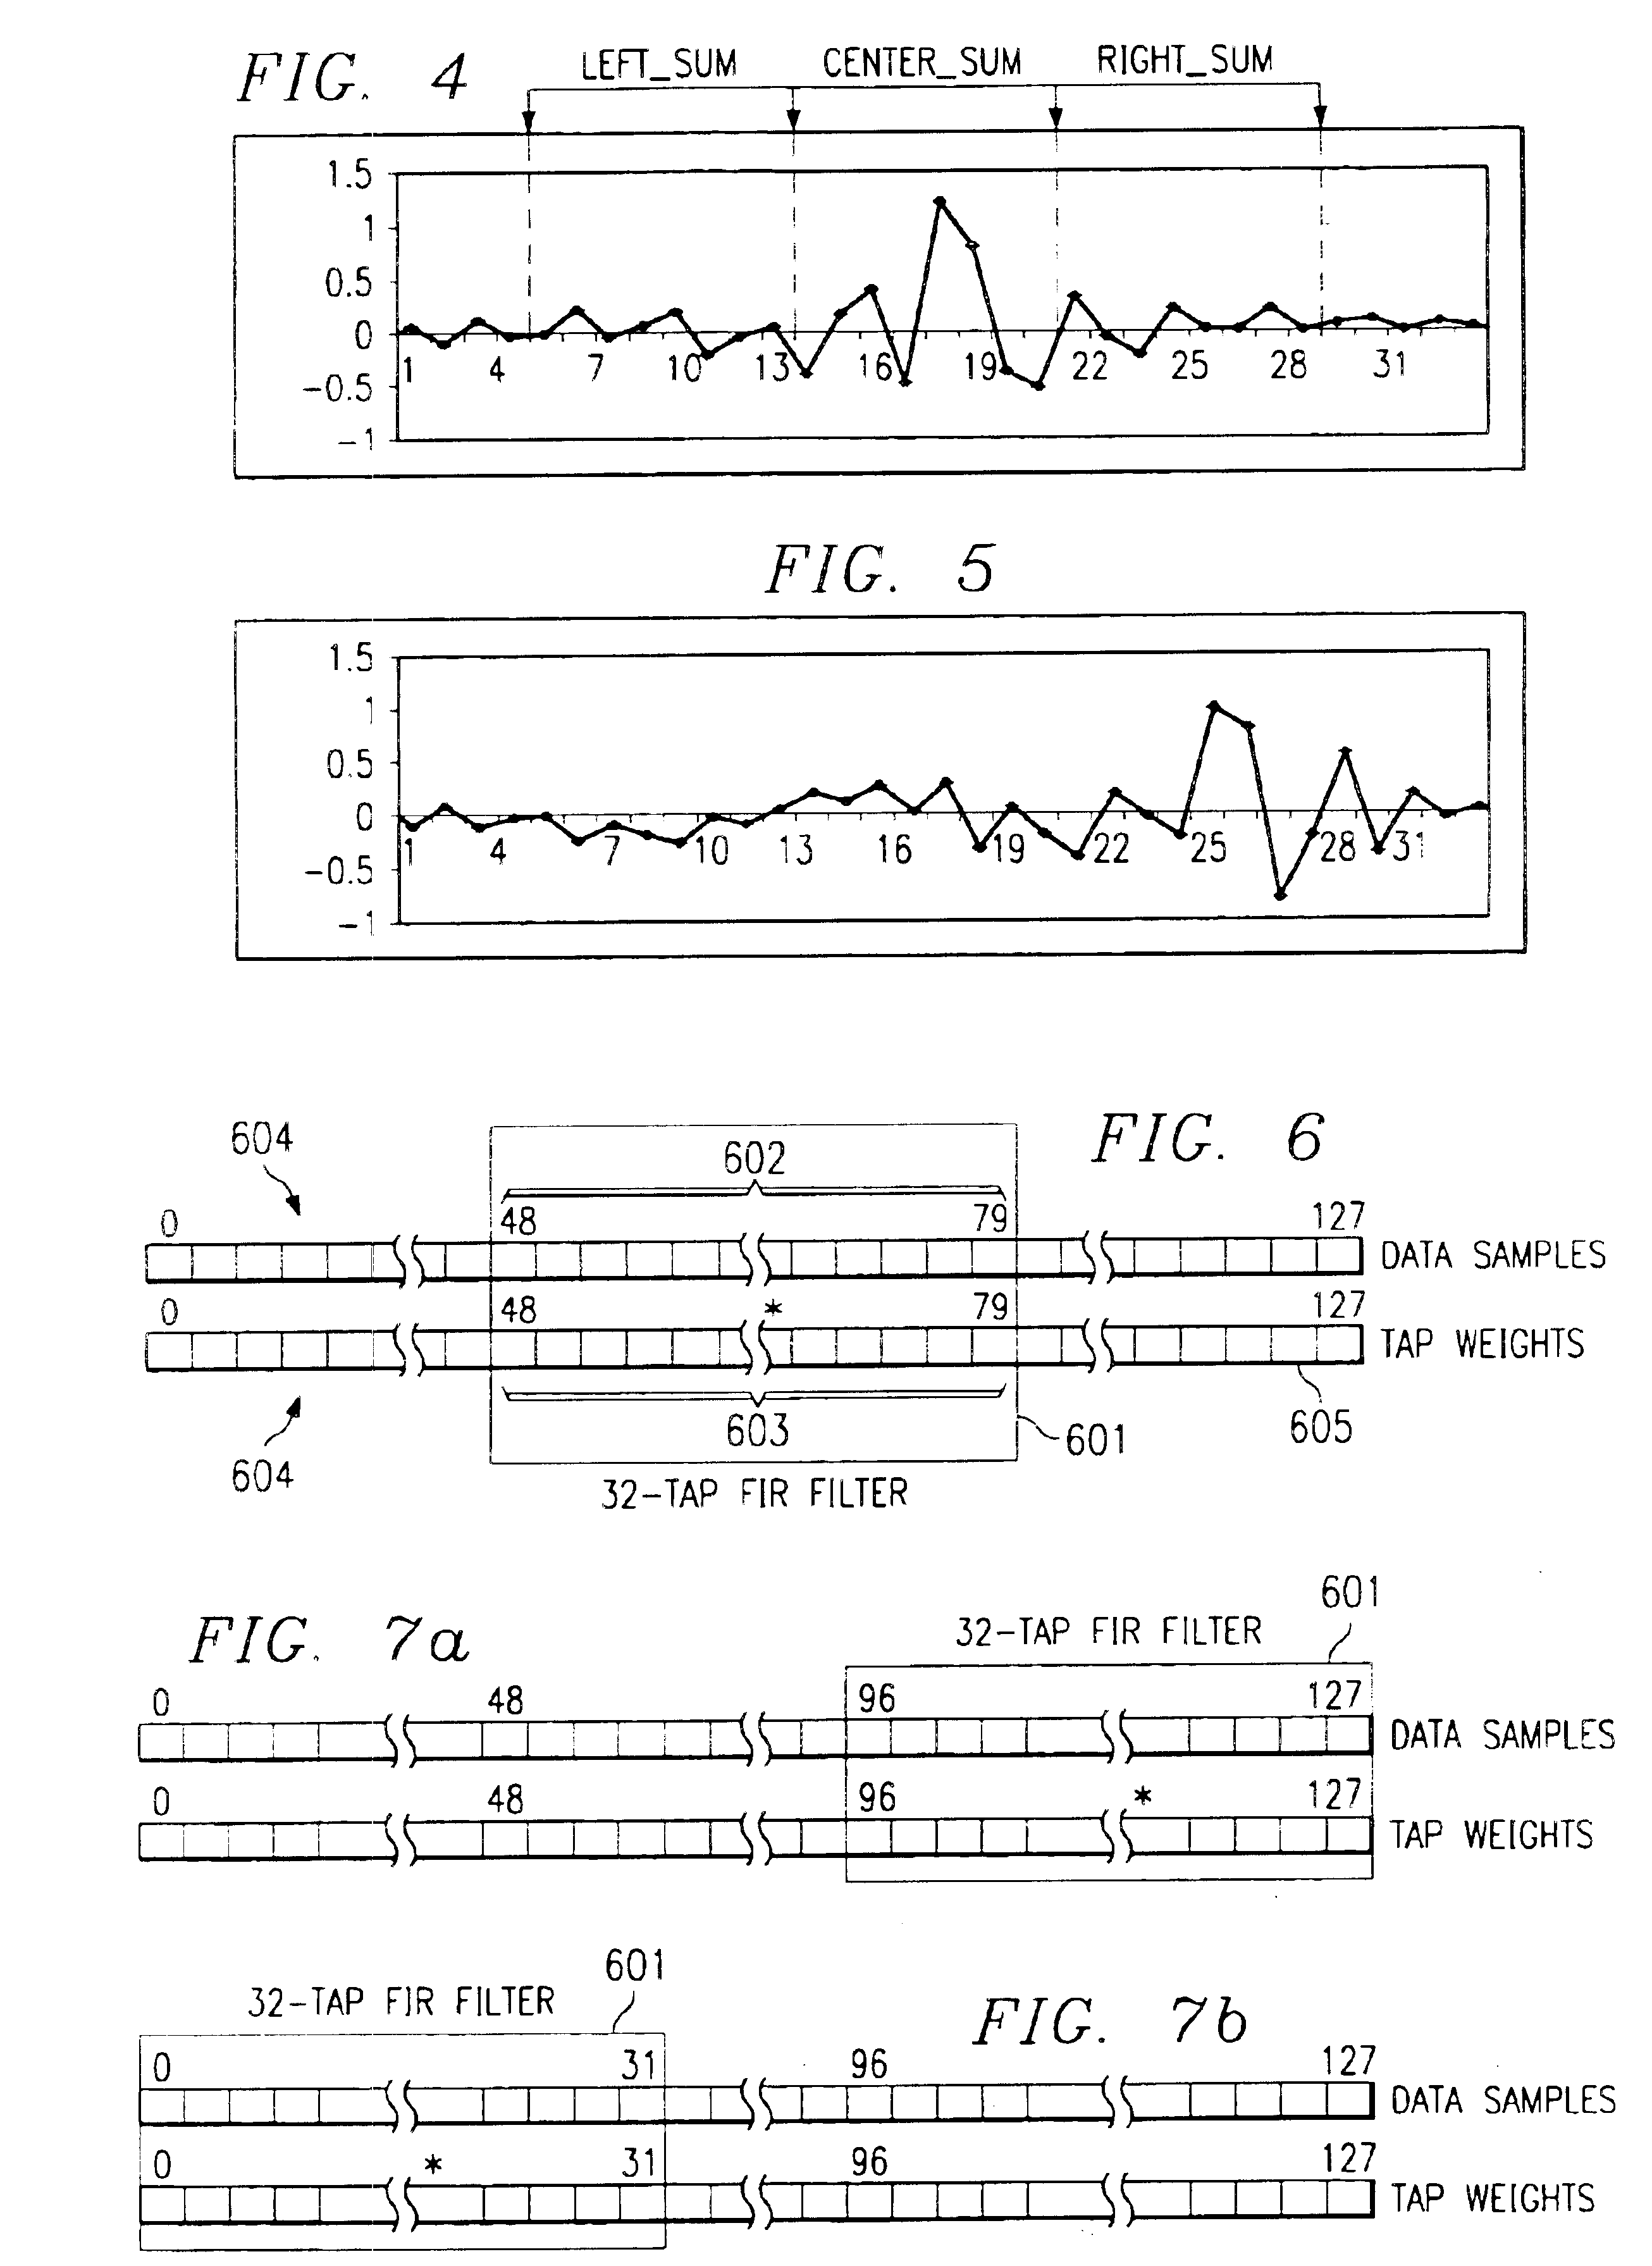 Timing recovery device and method for telecommunications systems